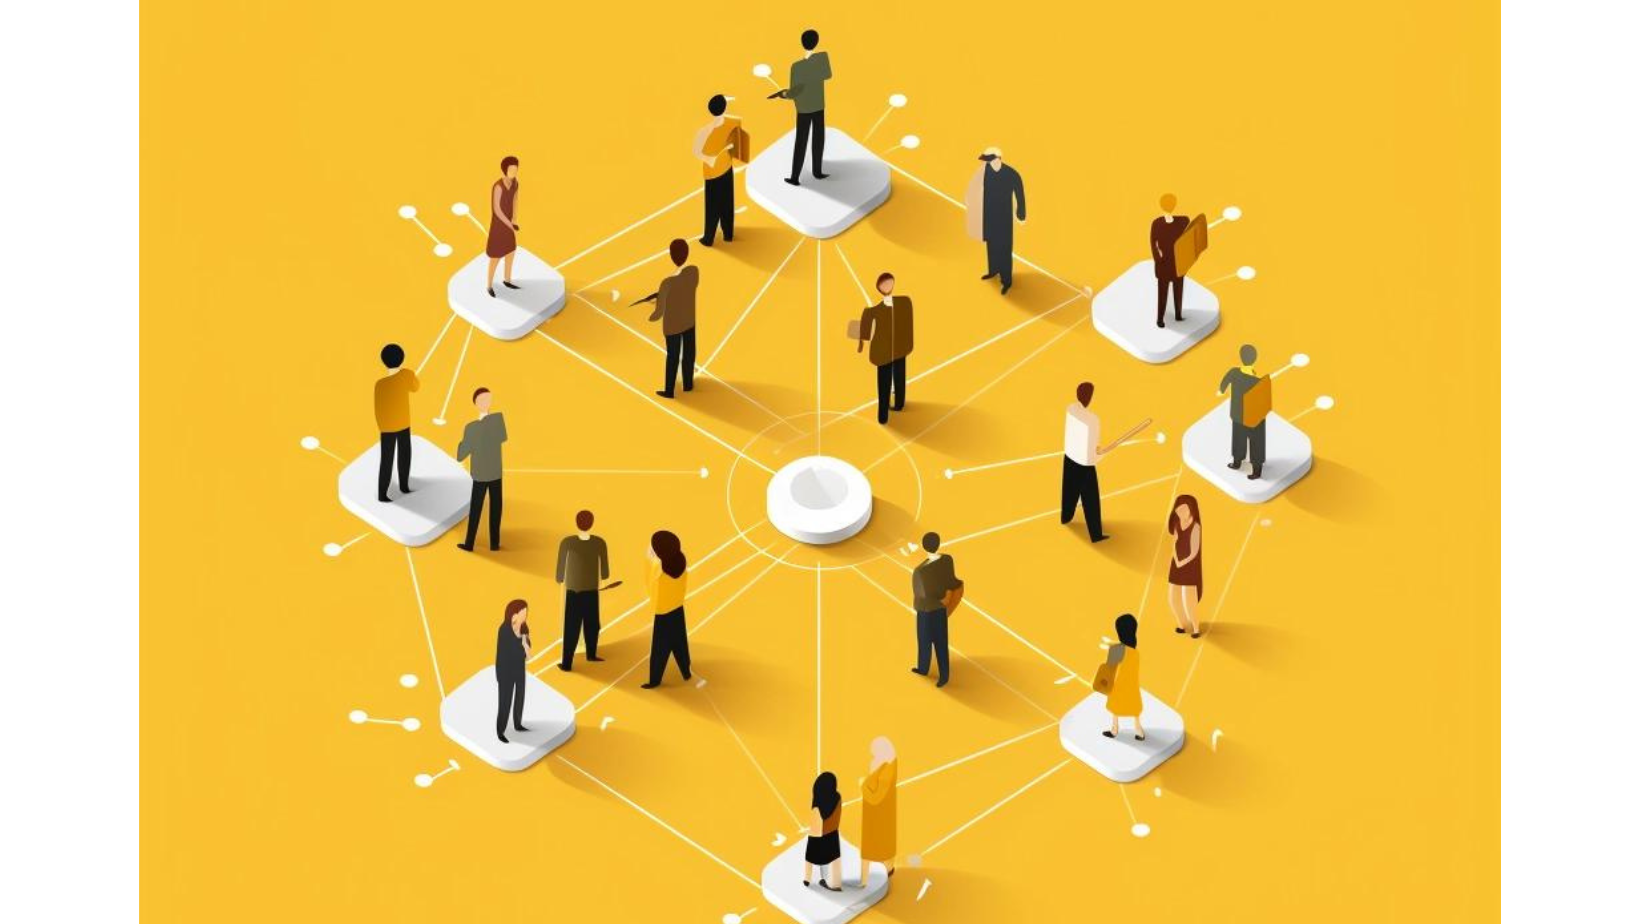 Animated image of multiple people connecting with each other.